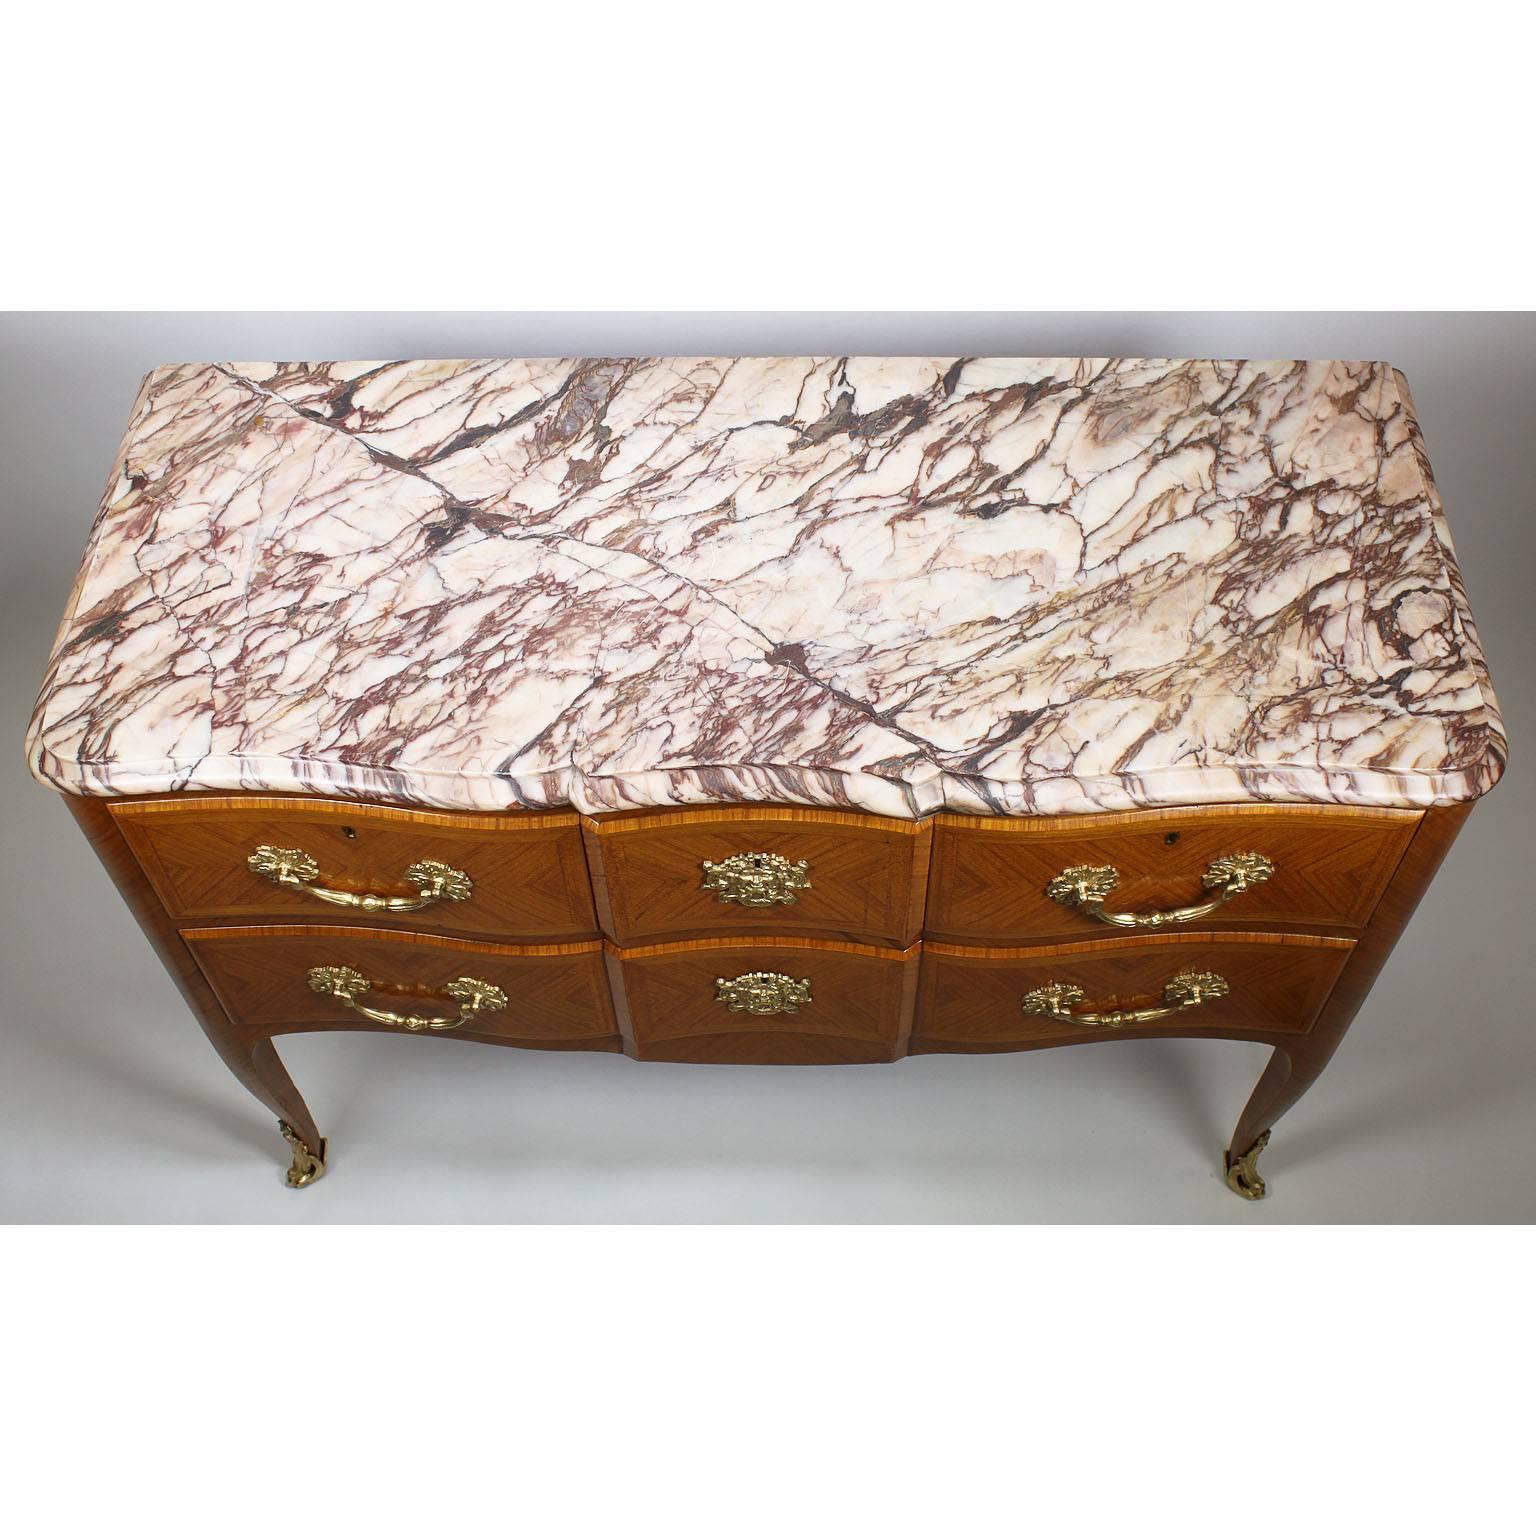 French 19th-20th Century Louis XV Style Stainwood & Gilt-Bronze Mounted Commode For Sale 1